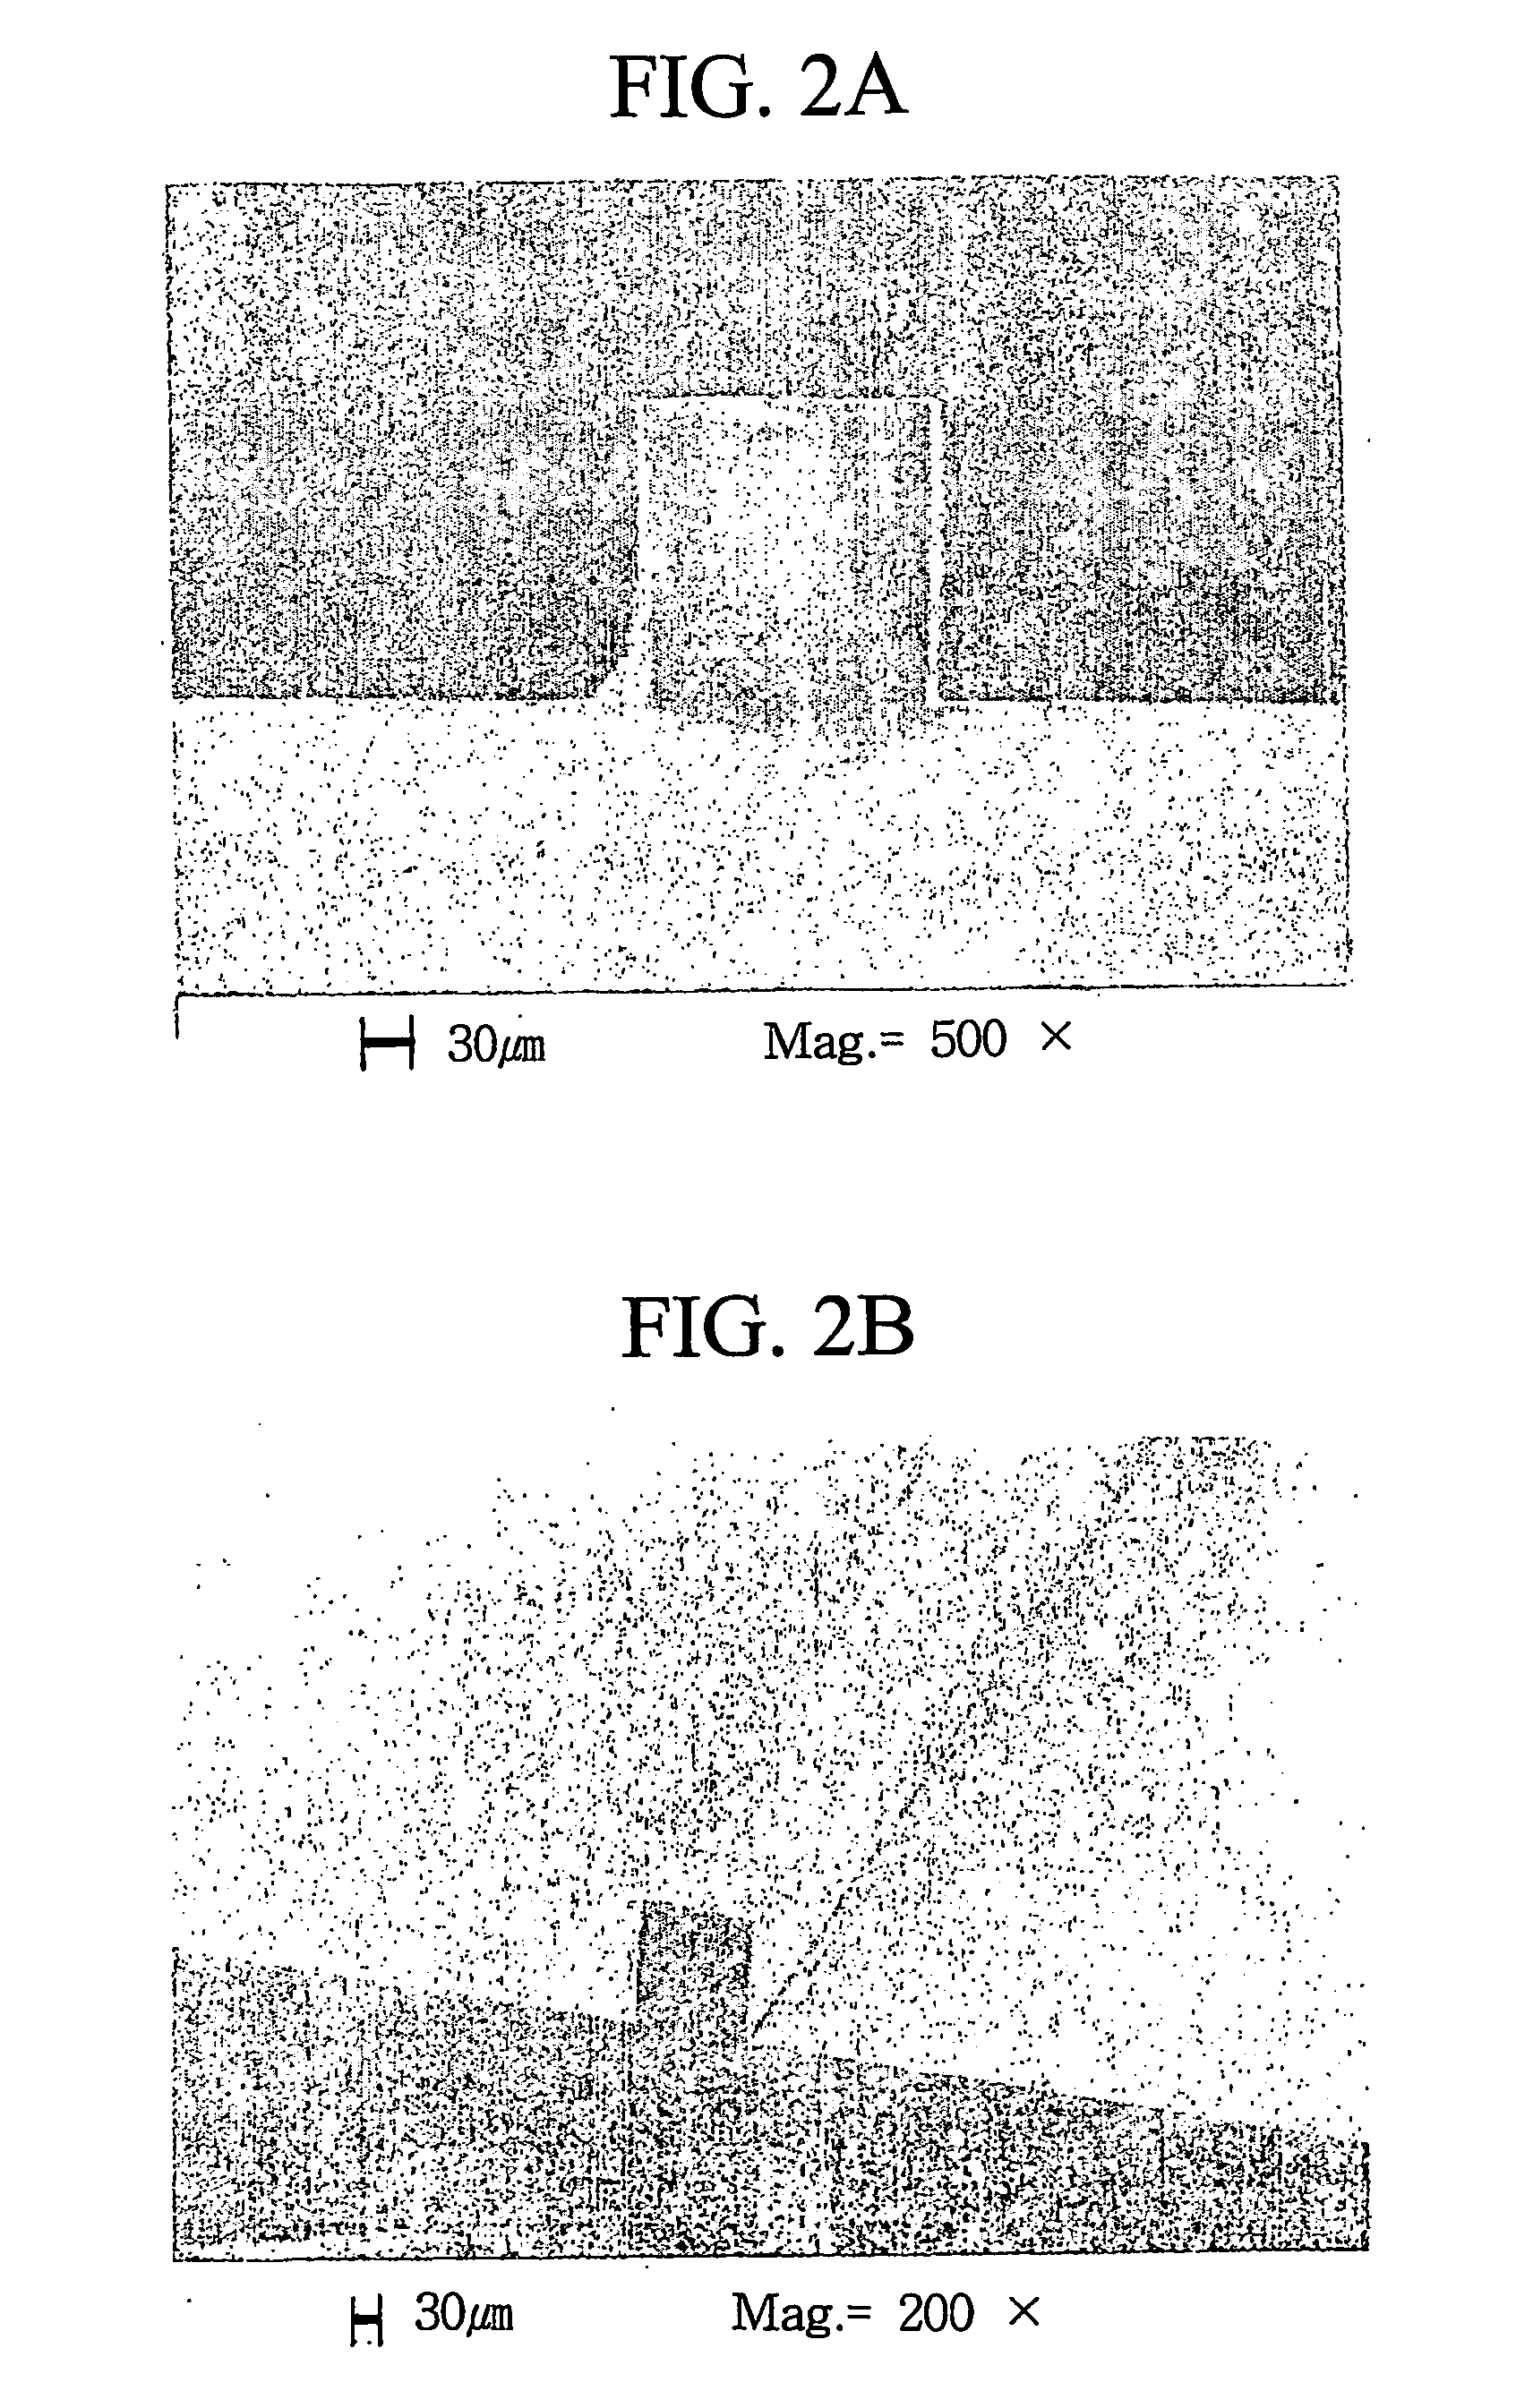 Fabrication of polymer waveguide using a mold